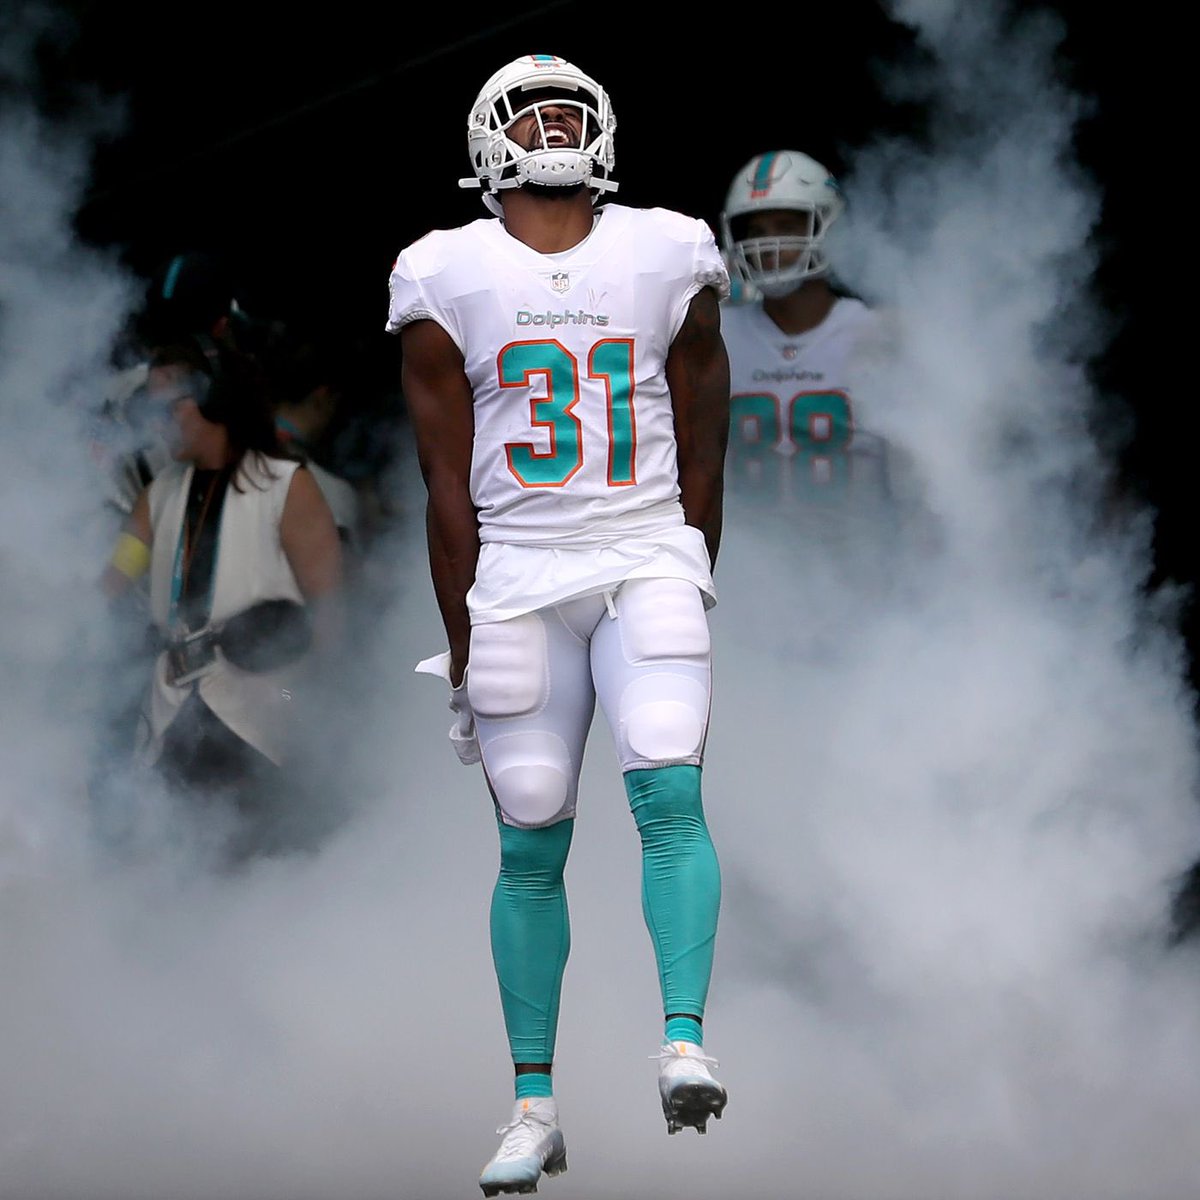 NEWS: #Dolphins running back Raheem Mostert earned a 1 MILLION DOLLAR bonus by surpassing 900 total yards from scrimmage this season. 🔥🔥🔥 Well done, @TesslerSports, as always!